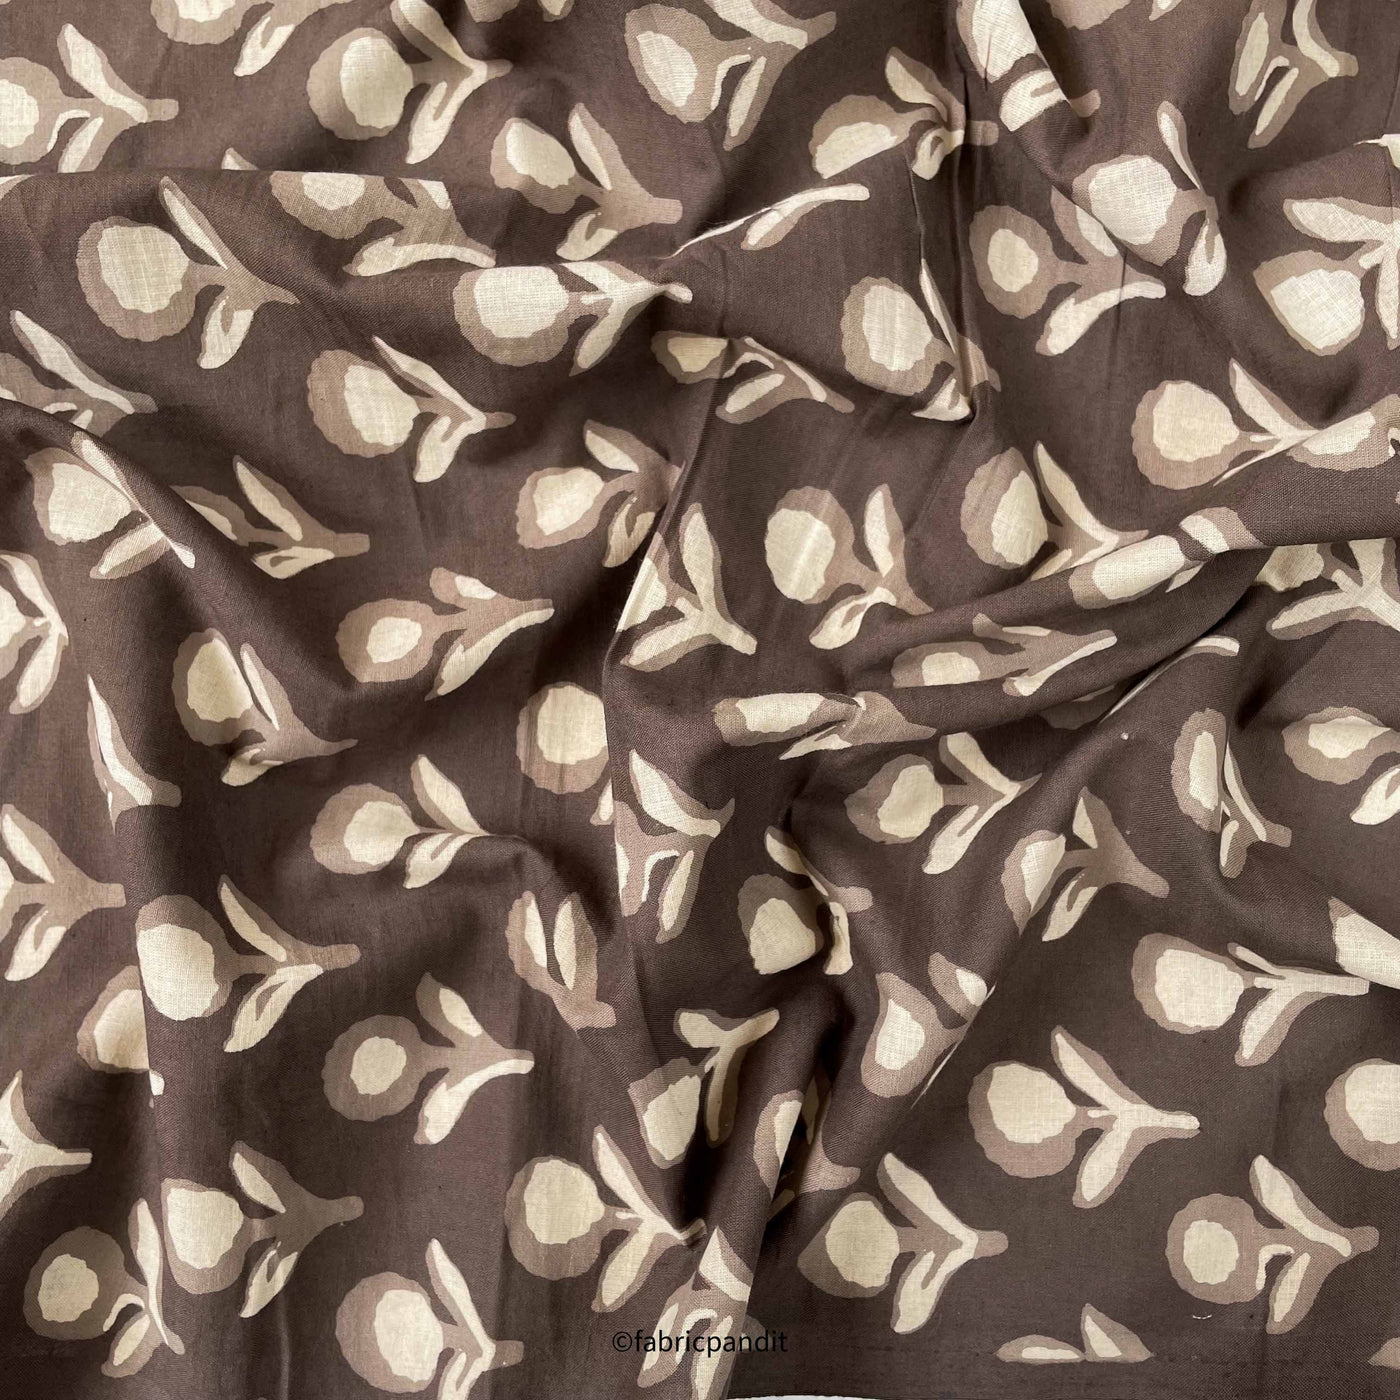 Hand Block Printed Cotton Fabric Cut Piece (CUT PIECE) Brown Indigo Dabu Natural Dyed Abstract Roses Hand Block Printed Pure Cotton Modal Fabric (Width 42 inches)